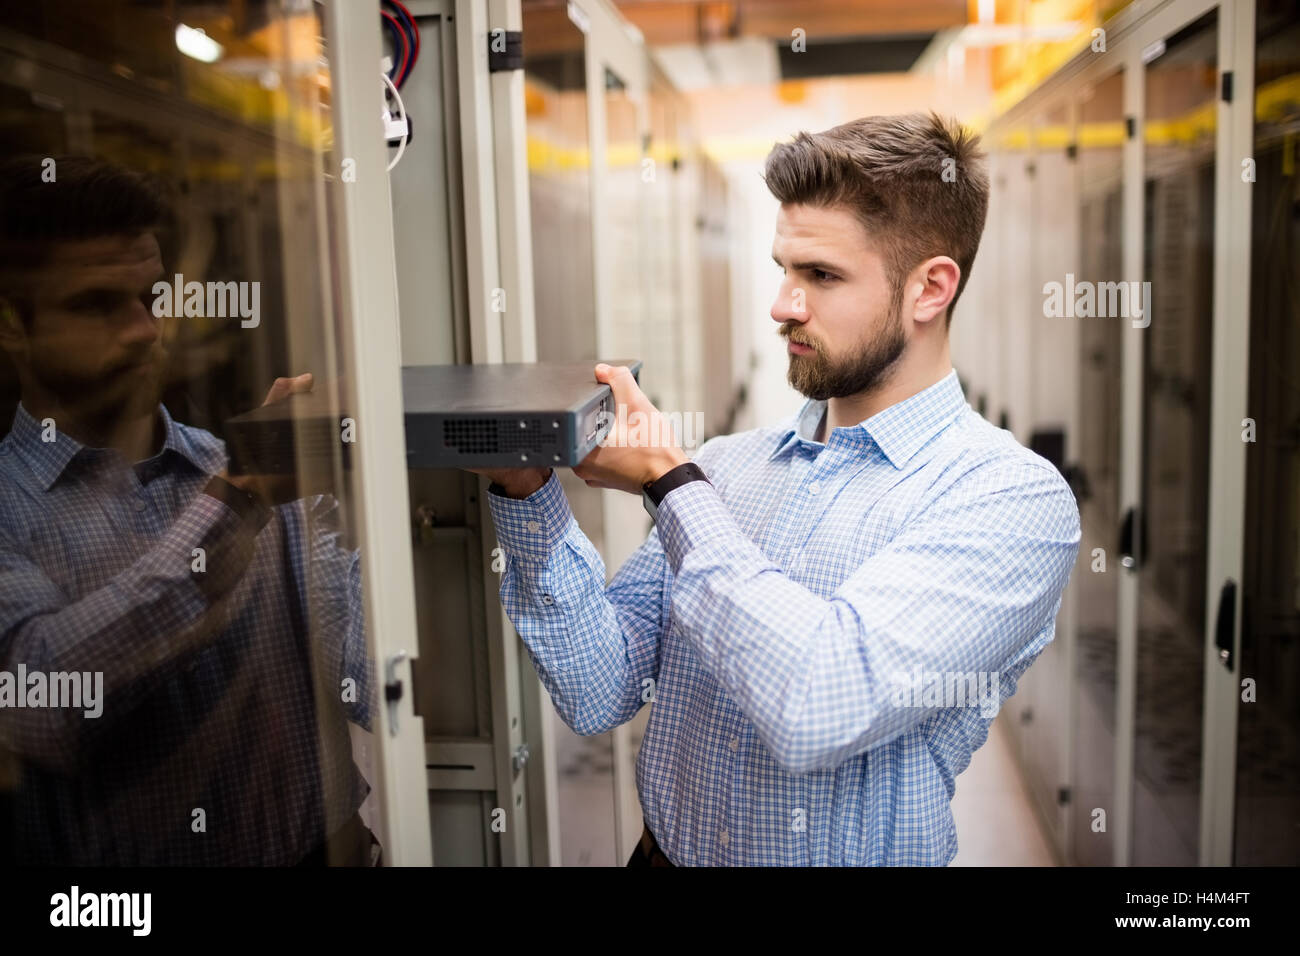 Technician removing server from rack mounted server Stock Photo